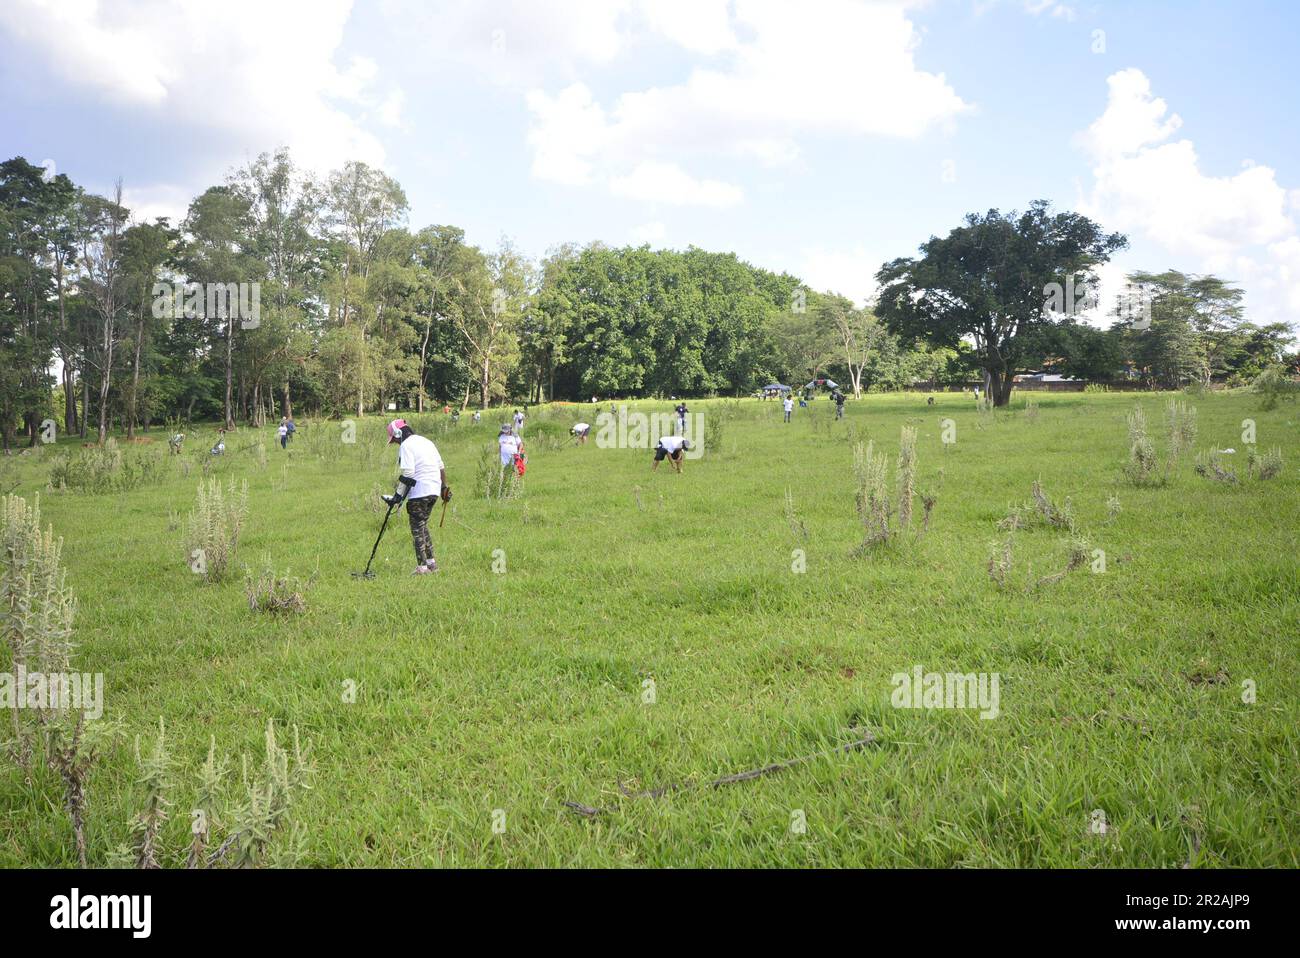 City:Marilia,  Sao Paulo, Brazil, March 25, 2023: Men and women in detectorism championship using metal detectors in a grassy lot with trees in the ba Stock Photo